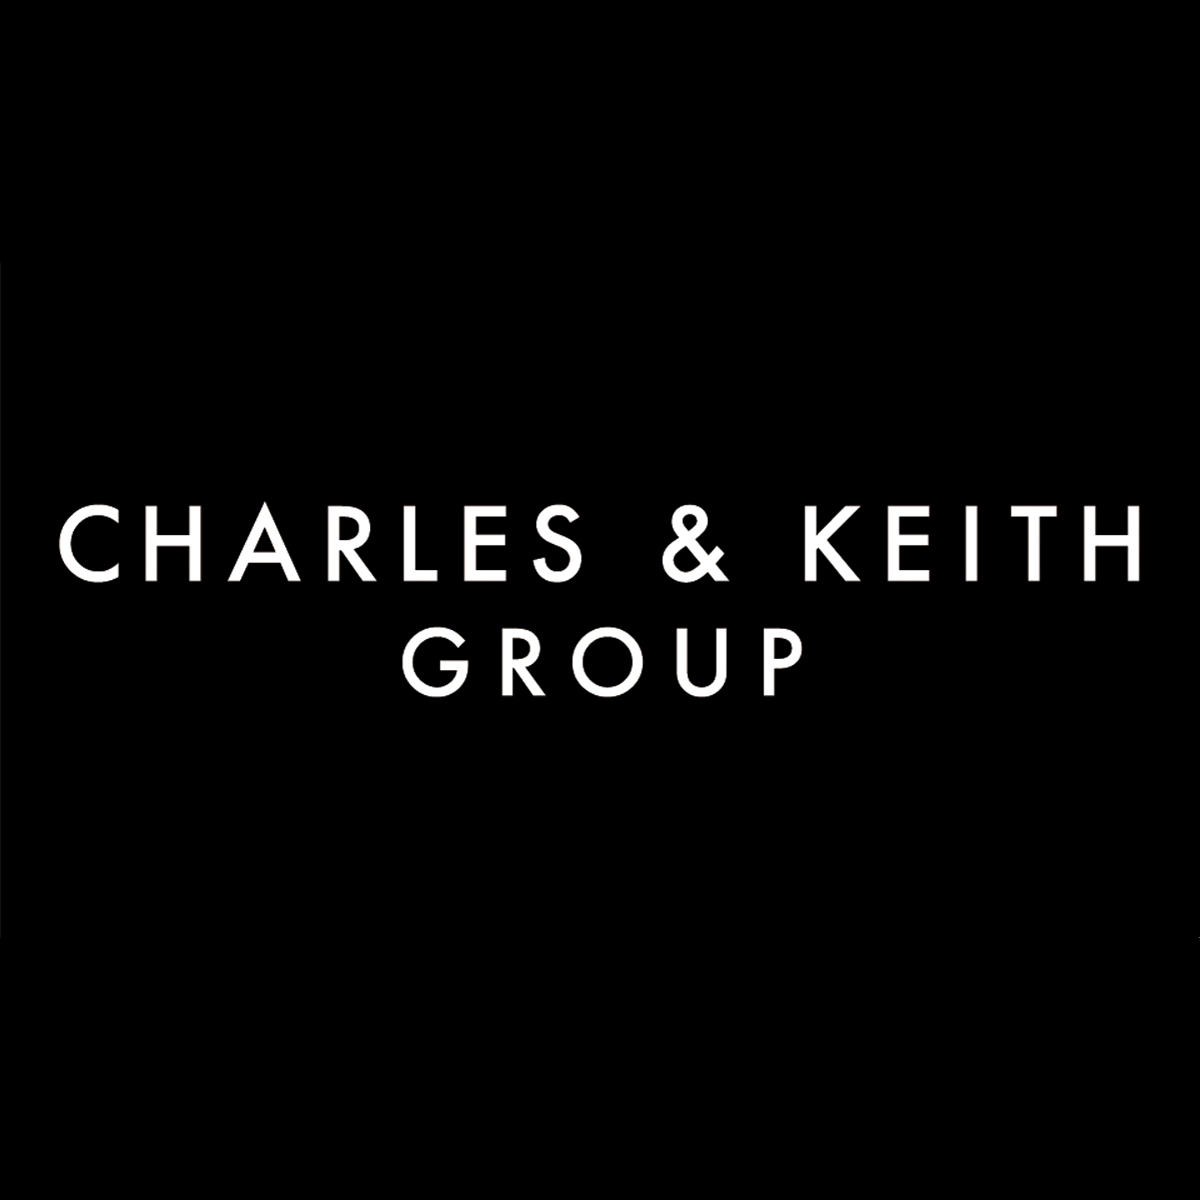 Charles And Keith - Crunchbase Company Profile & Funding